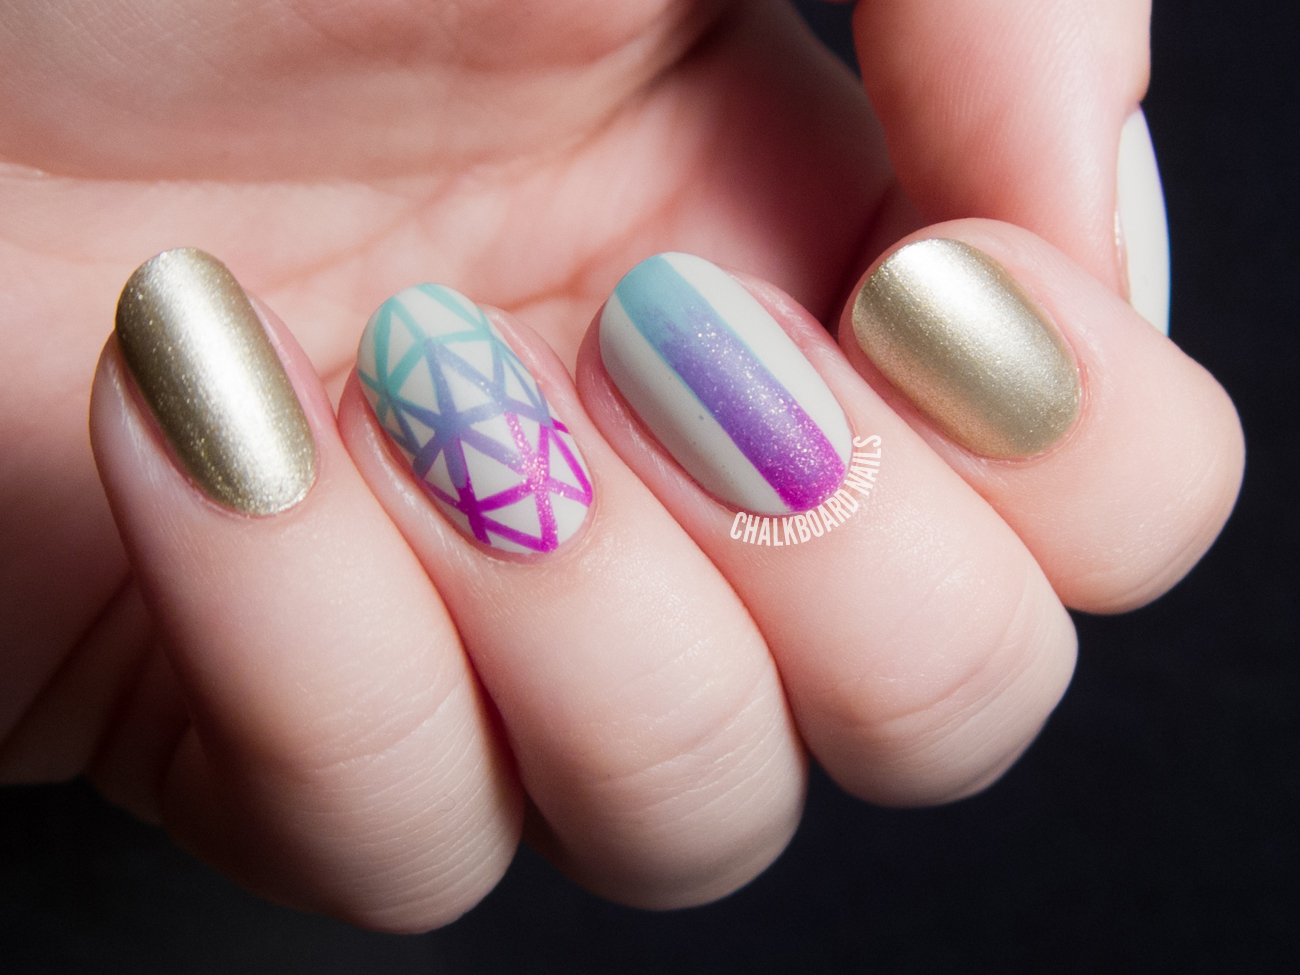 Scale Gradient Nail Art - wide 6